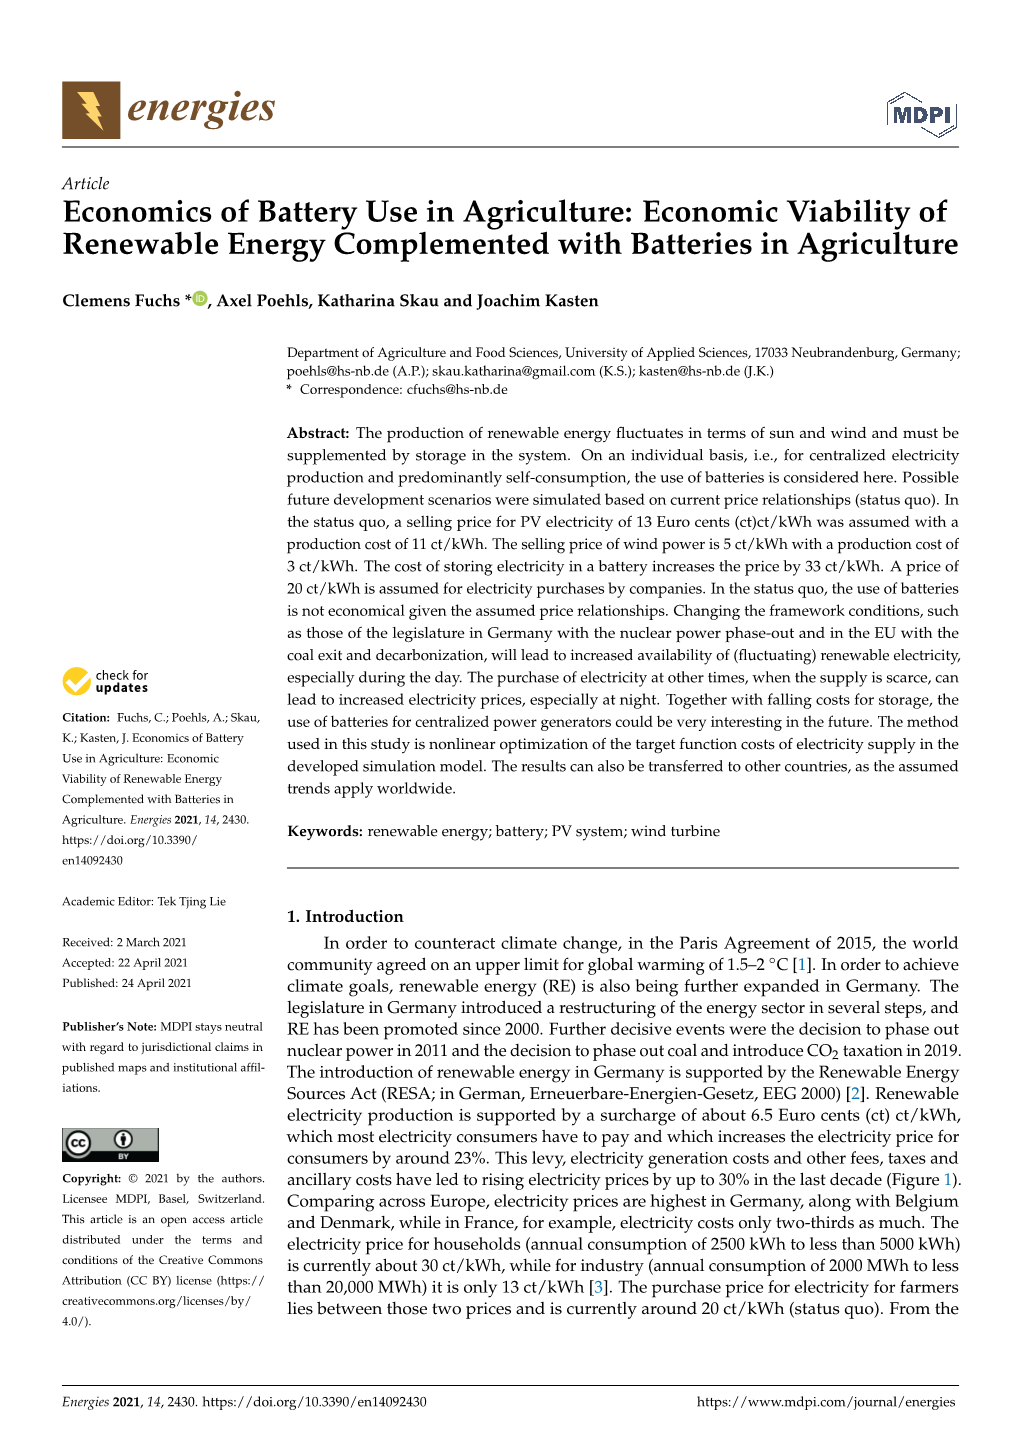 Economic Viability of Renewable Energy Complemented with Batteries in Agriculture